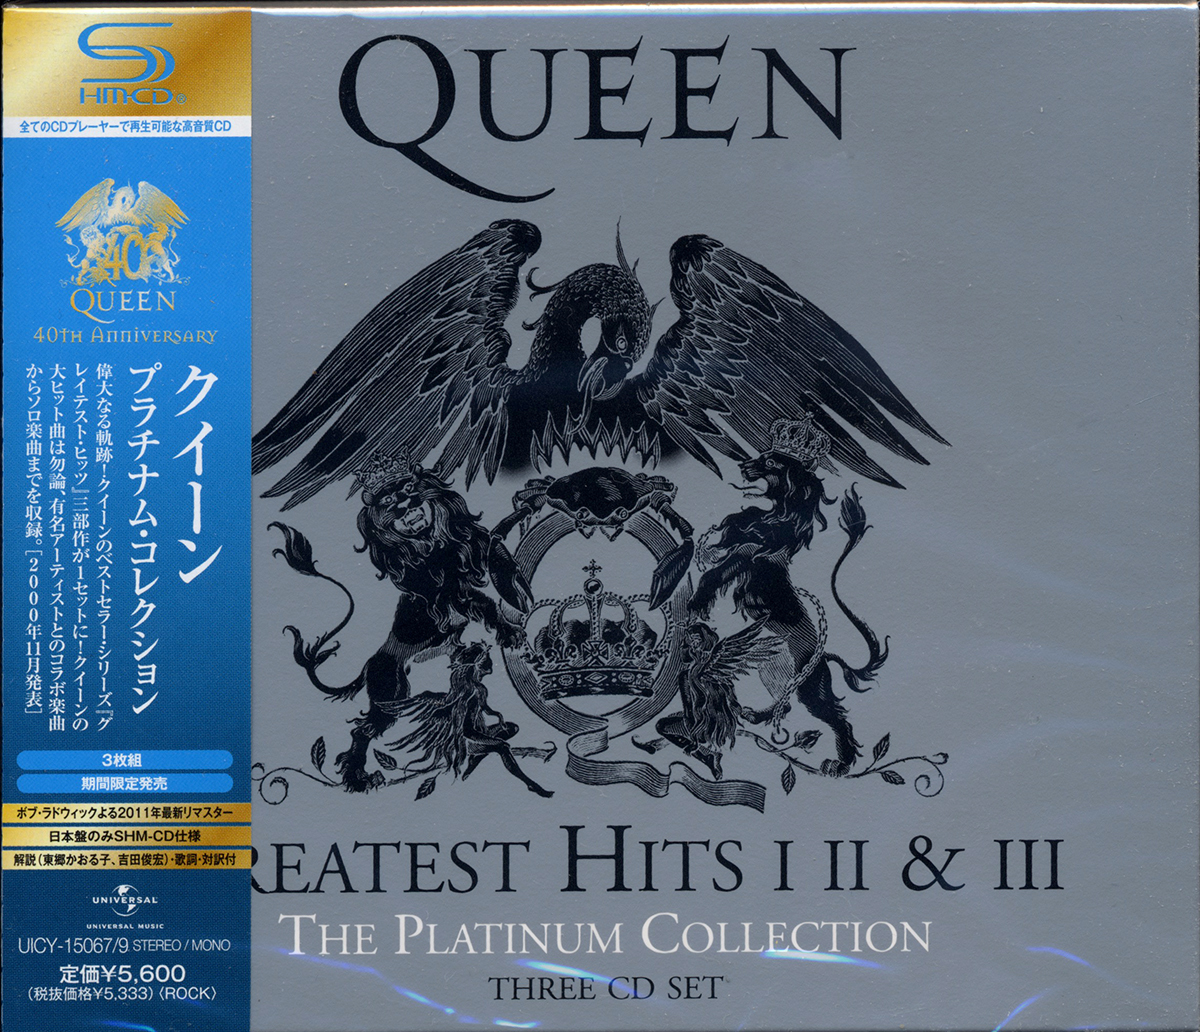 Greatest hits collection. Queen Greatest Hits 1 CD. Queen 2011 `the Greatest Hits i, II & III. Platinum collection`. Queen Greatest Hits 1 2 3 Platinum collection. Greatest Hits III Queen.